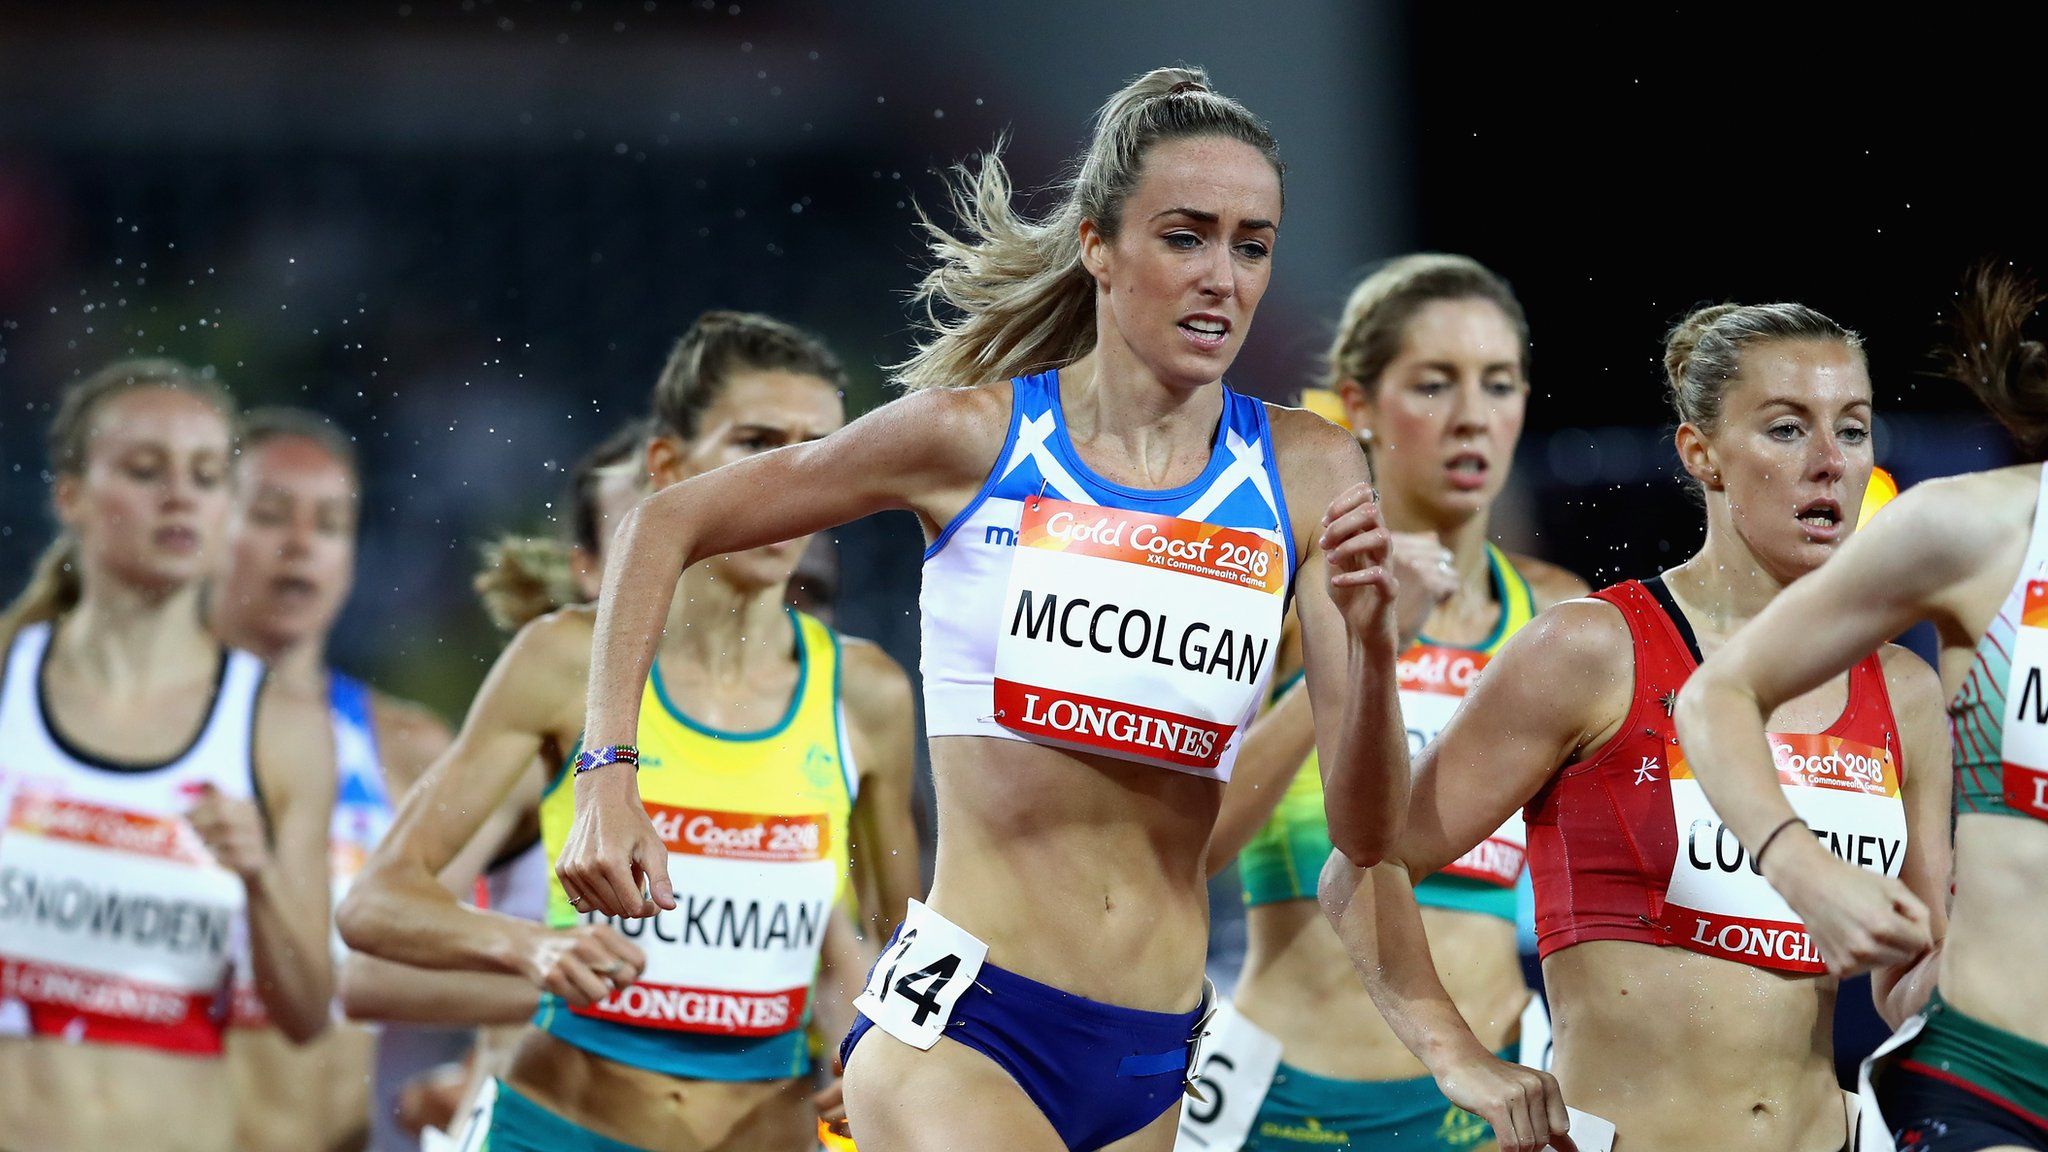 Eilish McColgan in action at the 2018 Commonwealth Games